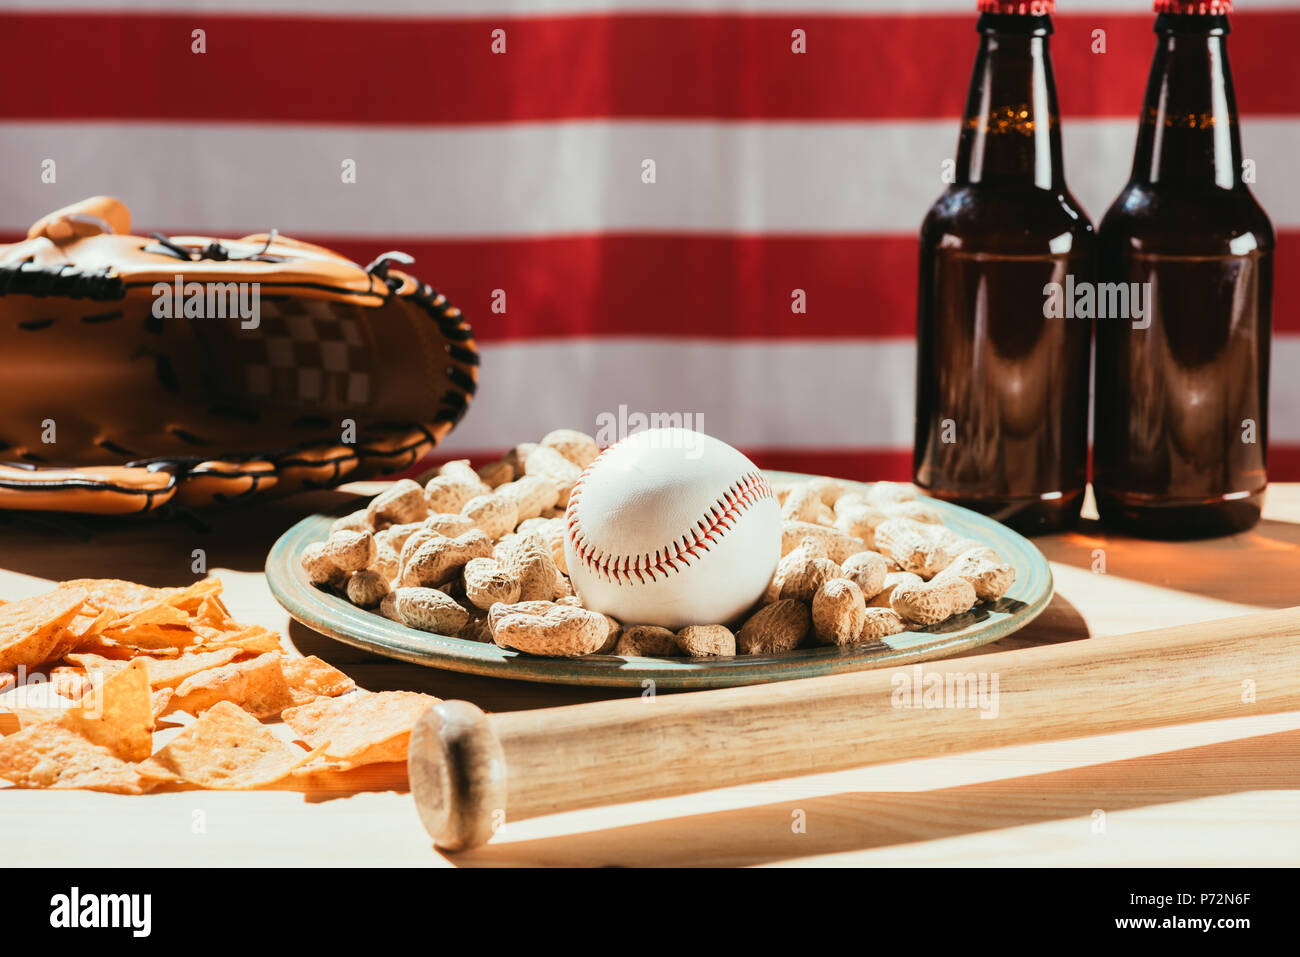 close-up view of baseball ball on plate with peanuts, bat and beer bottles, leather glove and american flag Stock Photo